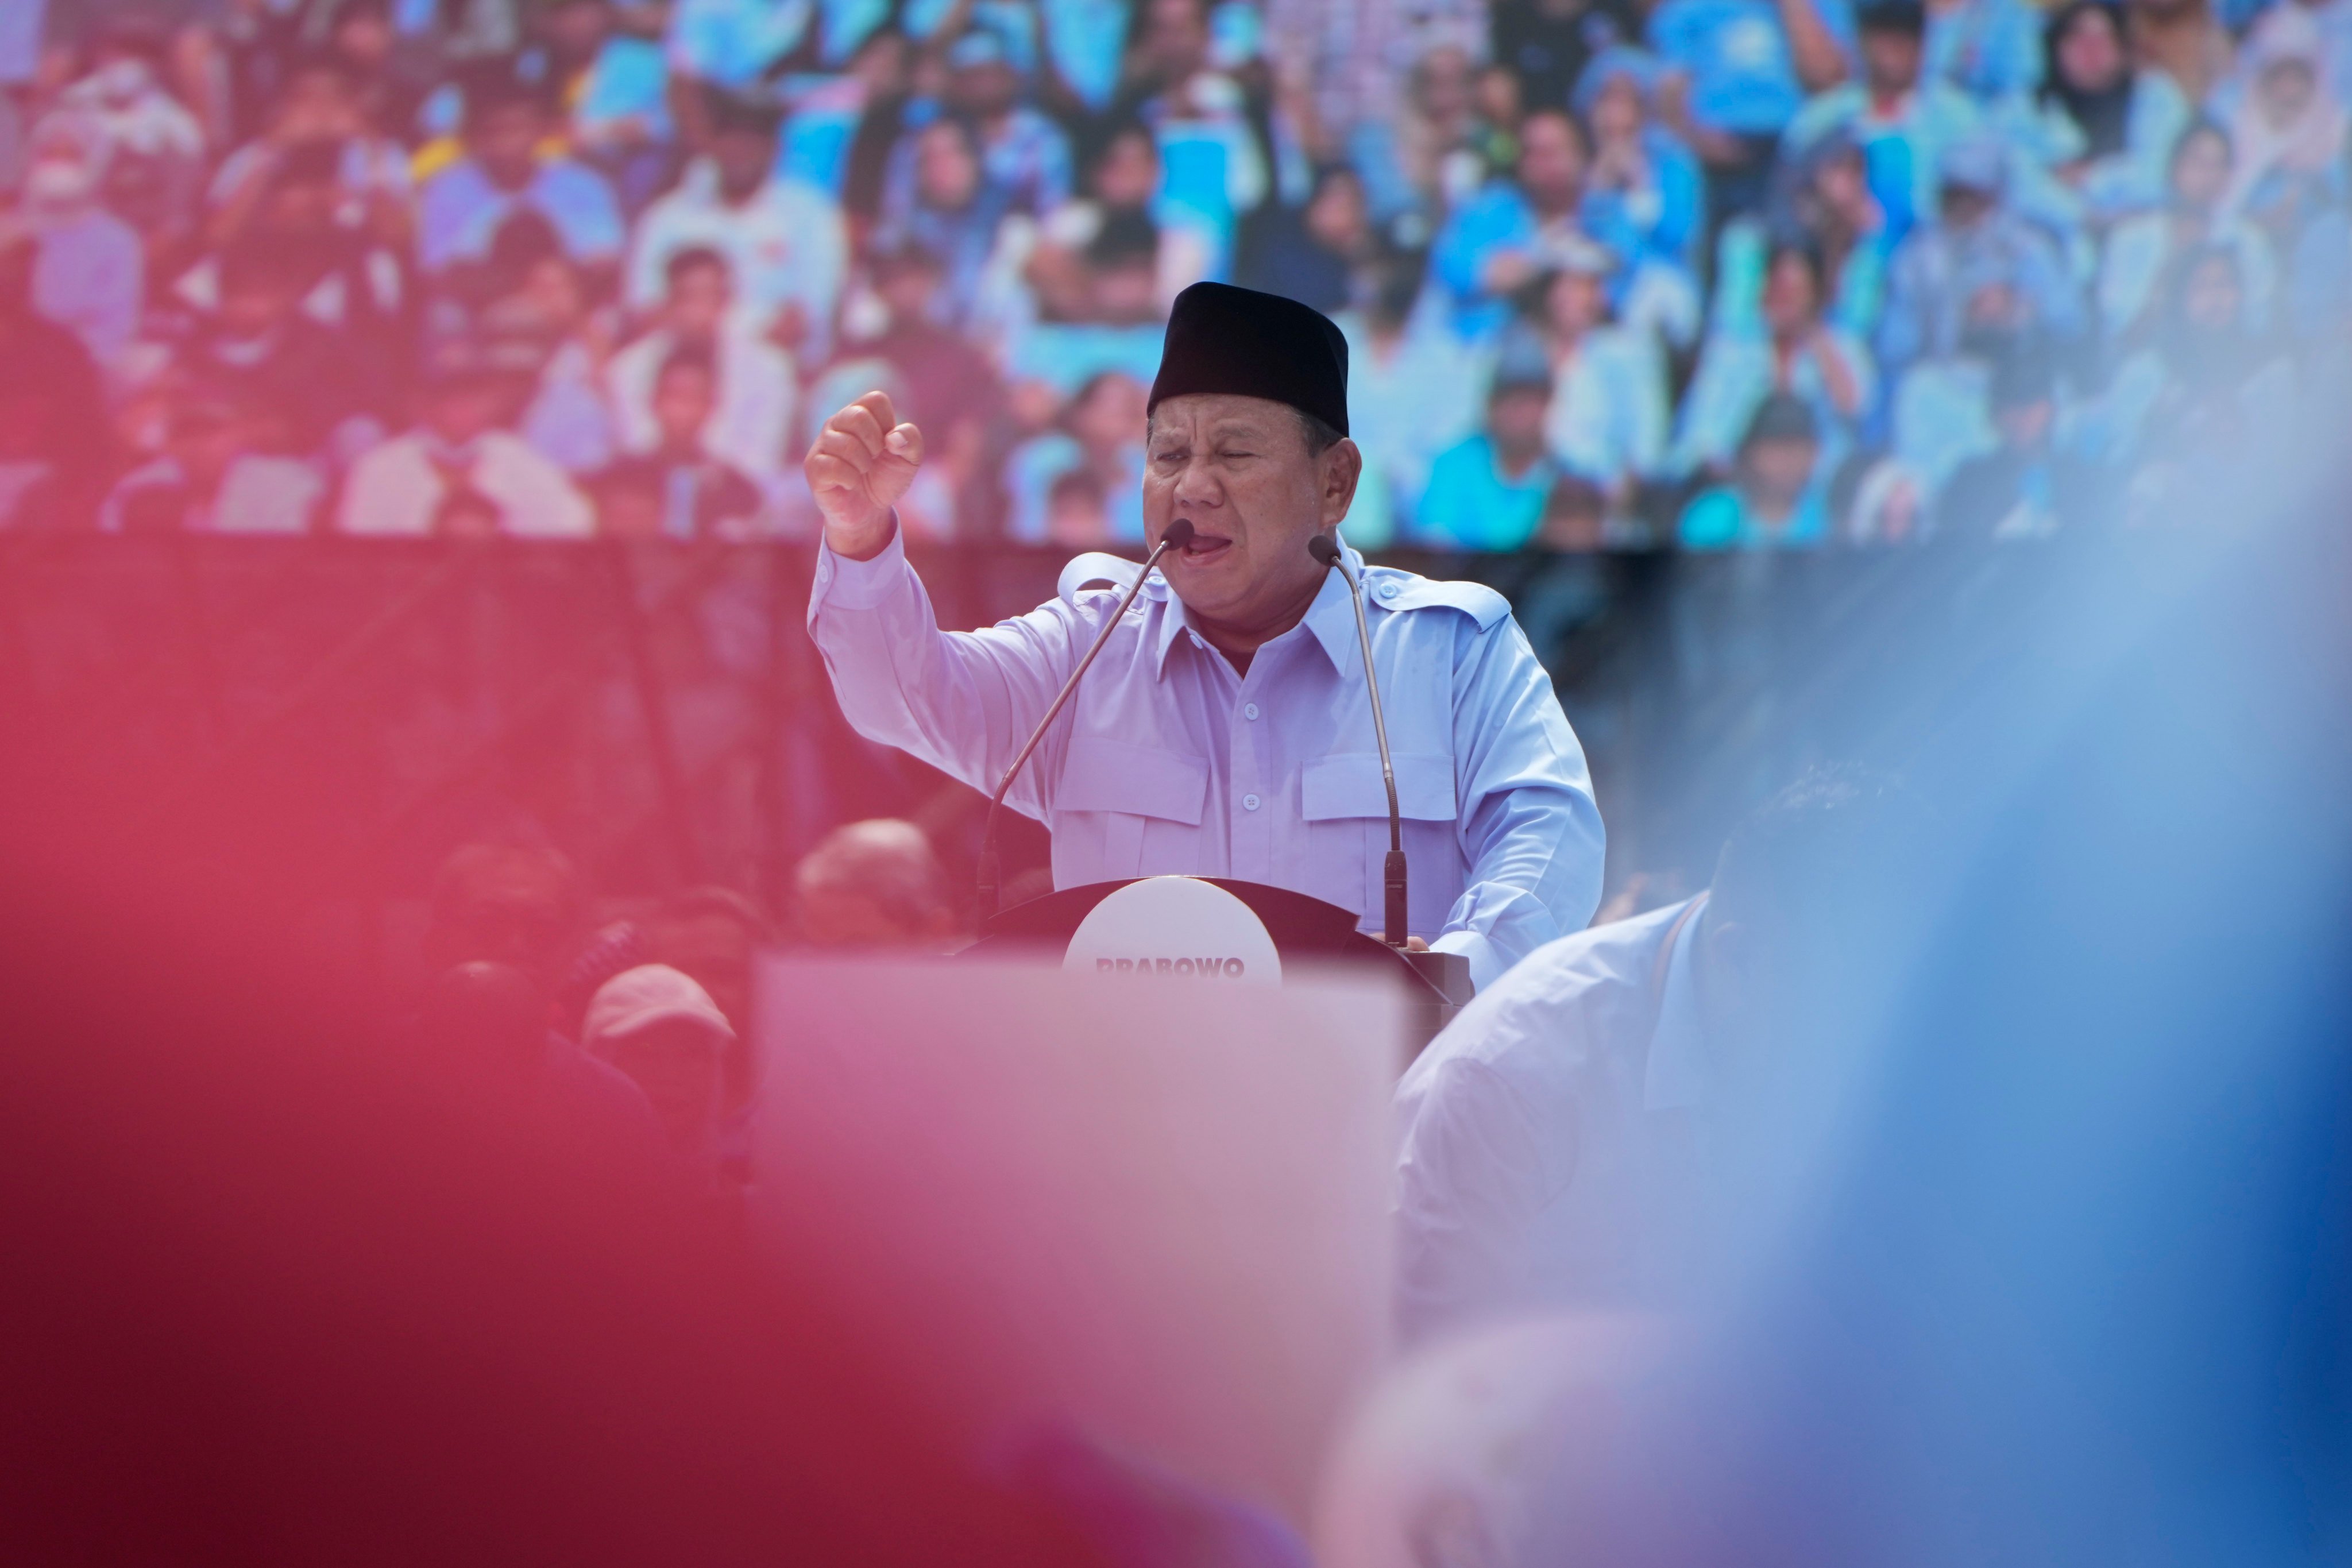 Presidential candidate Prabowo Subianto gestures as he speaks during his final campaign rally at Gelora Bung Karno Main Stadium in Jakarta on Saturday. Photo: AP